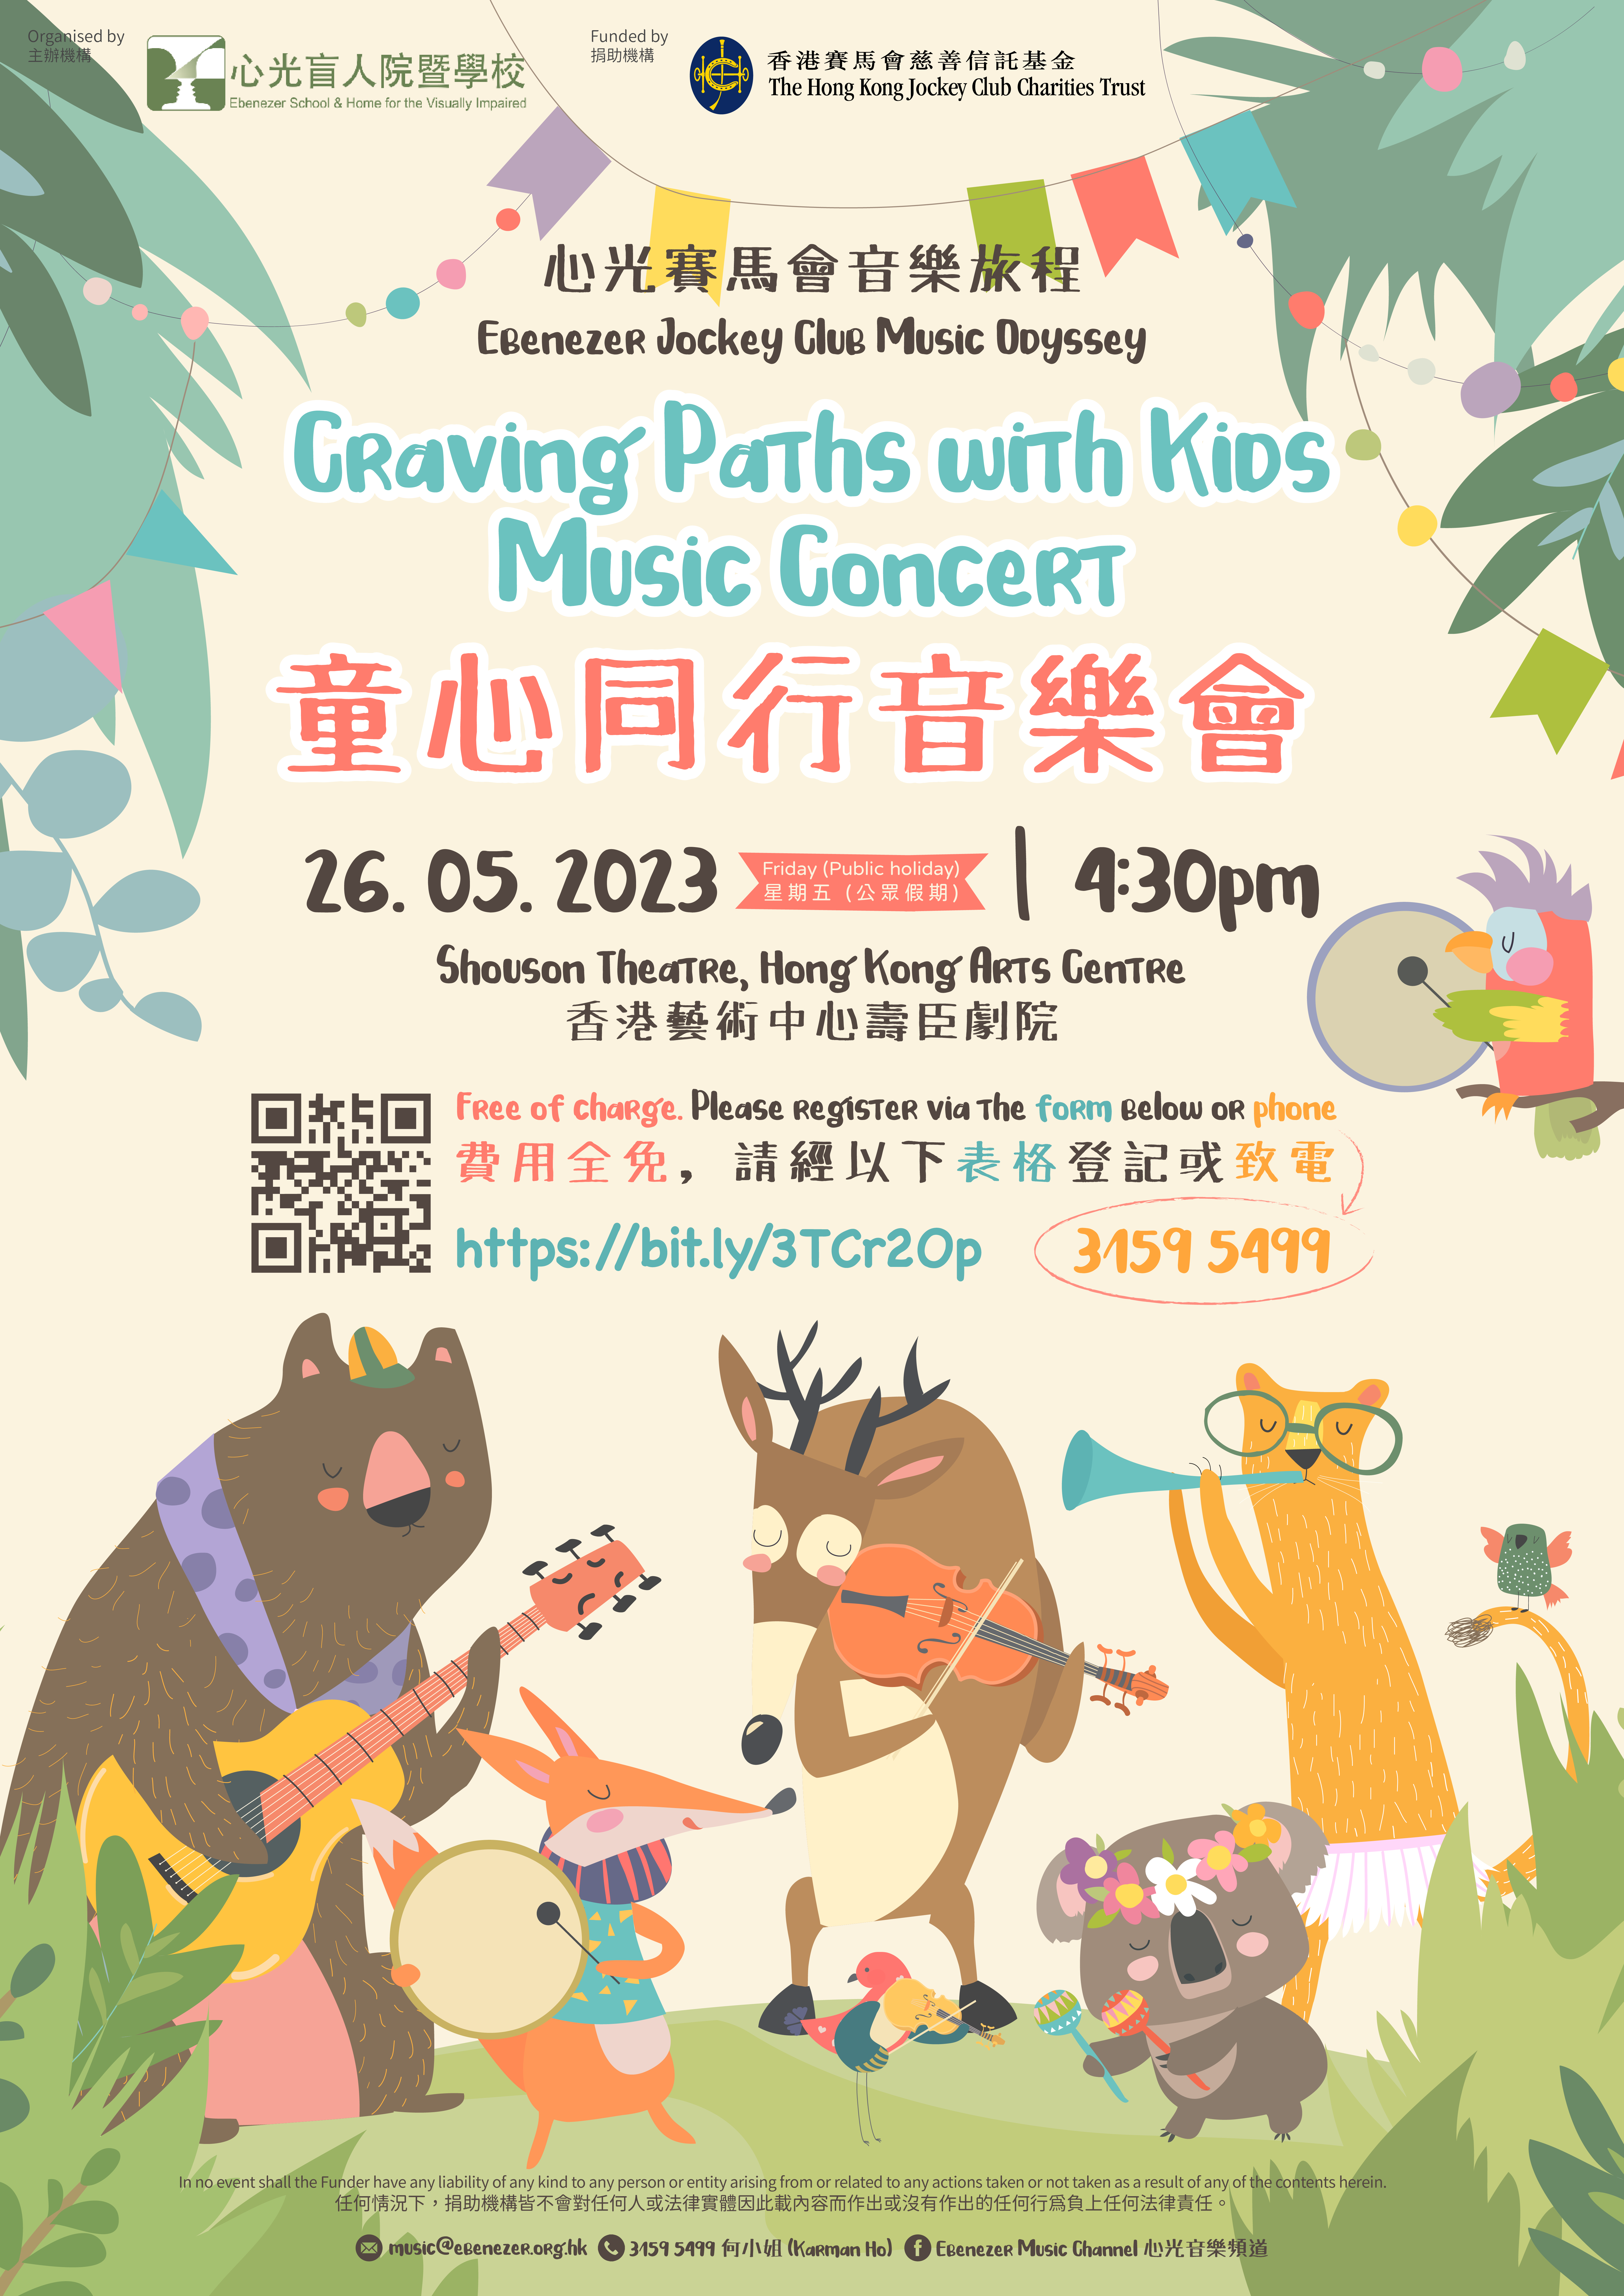 Craving Paths with Kids Music Concert